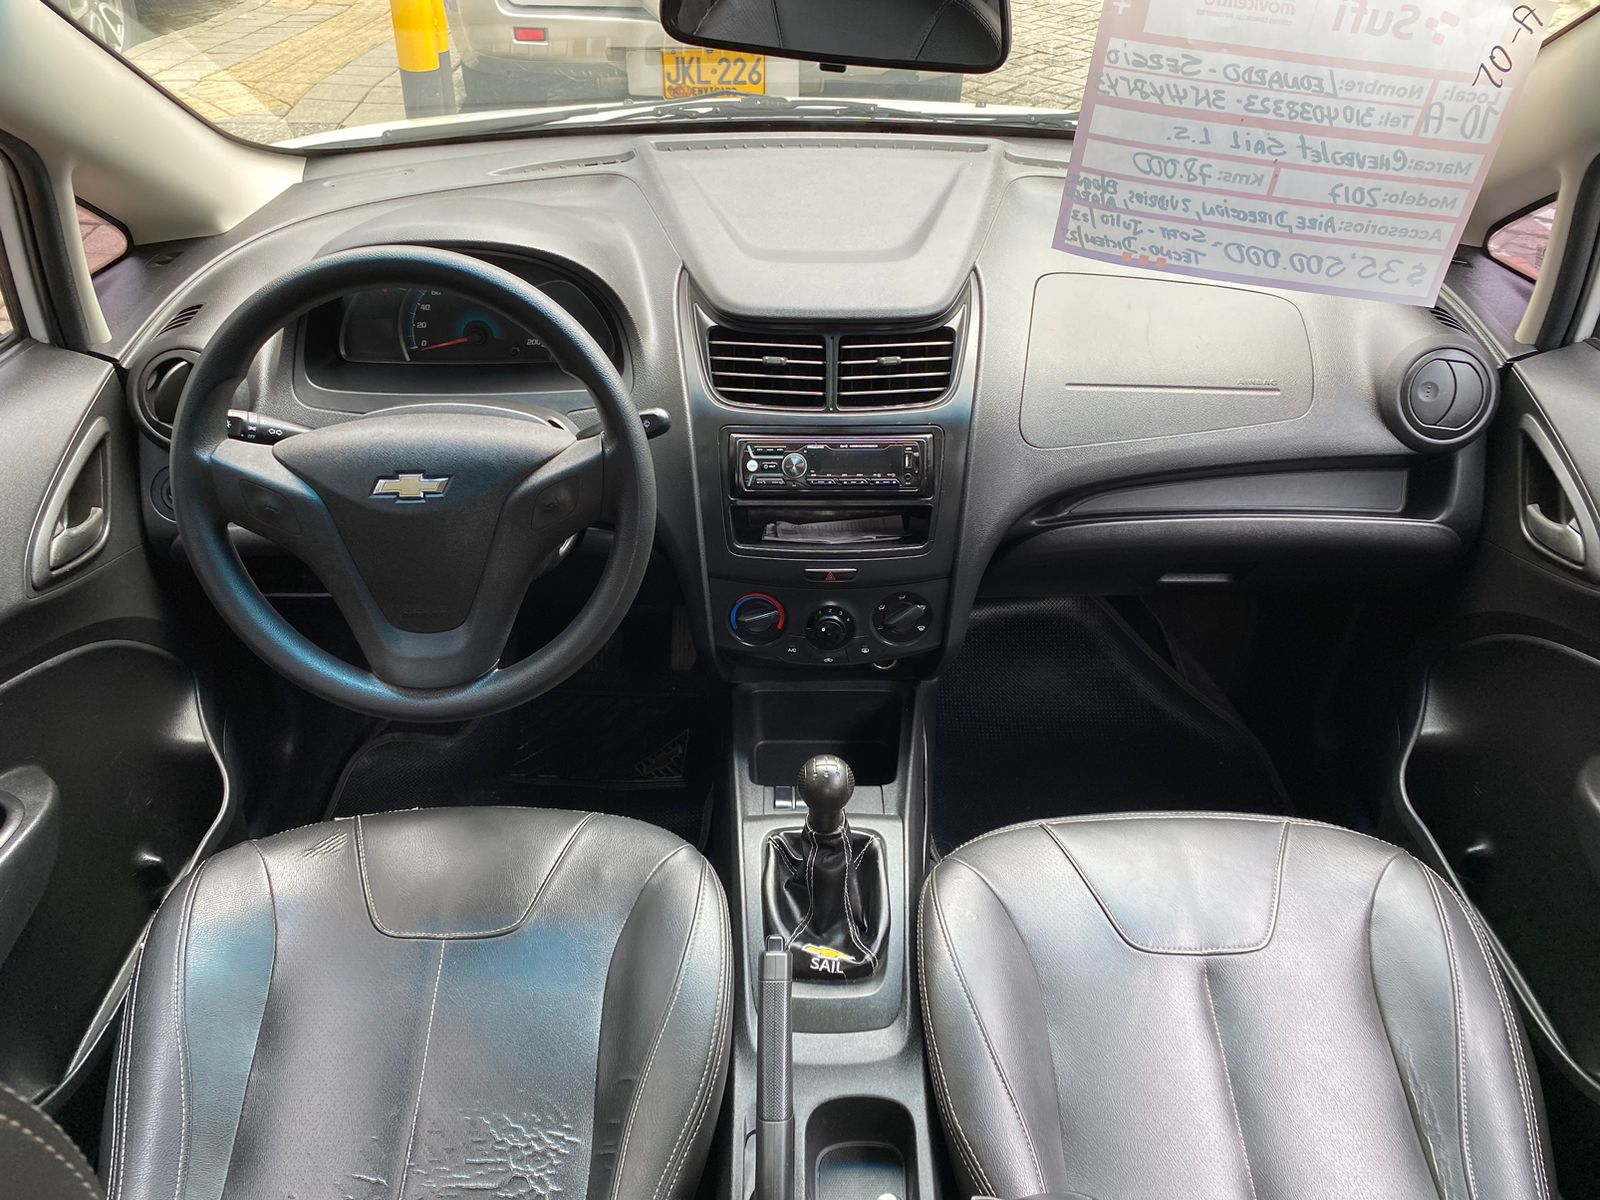 Used 2013 Chevrolet Sail 20122014 13 LS for sale in Hyderabad at  Rs315000  CarWale